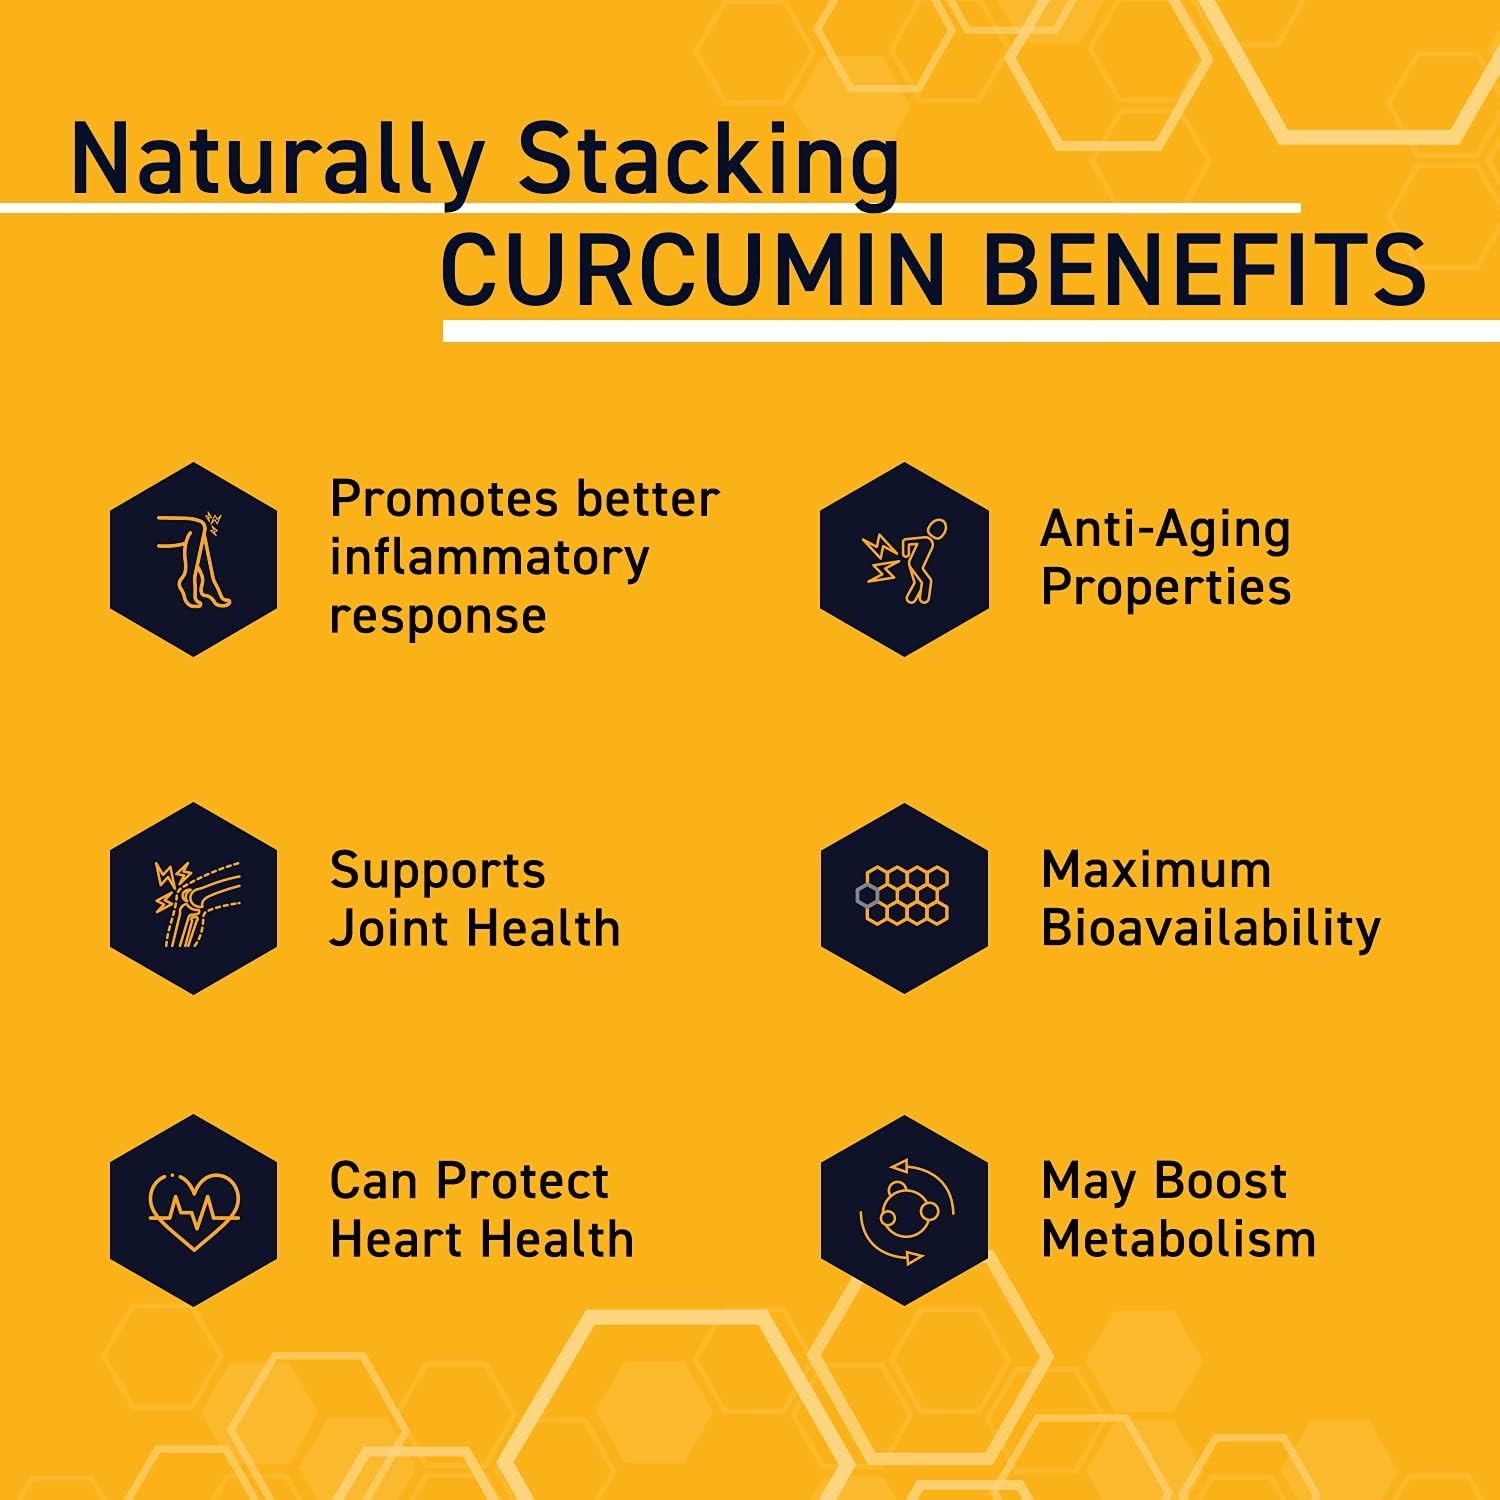 NATURAL STACKS Turmeric Curcumin 60 ct. - 185x More Bioavailable Liquid Soft Gel - Supports Joints, Heart and Brain Function, Immunity and Metabolism - 100mg Organic Coconut Oil for Rapid Absorption